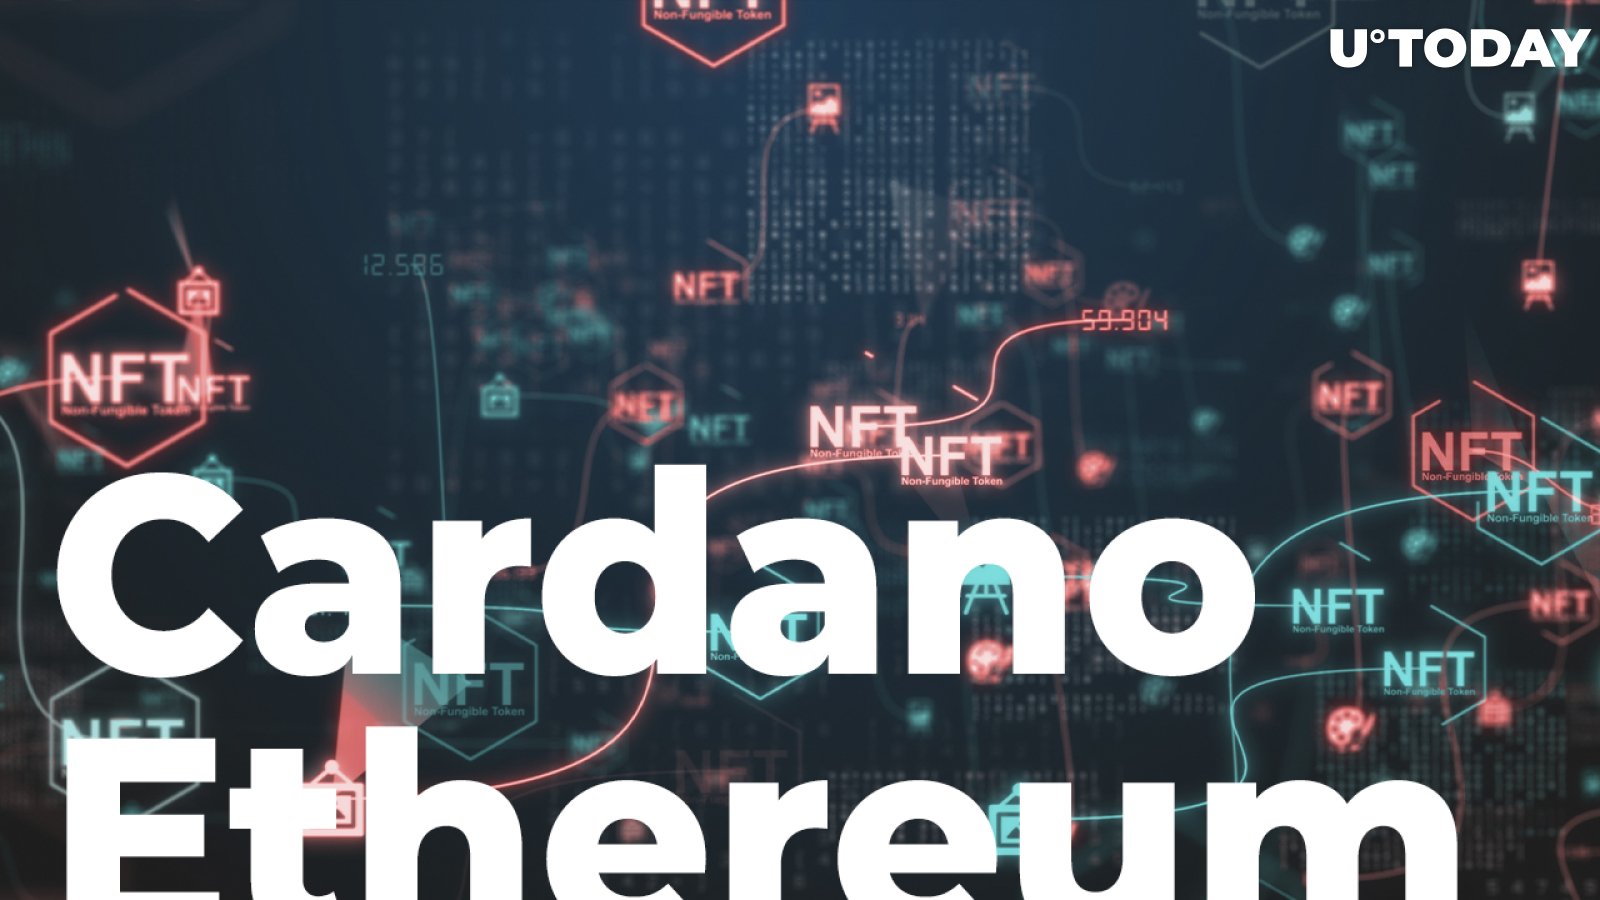 Cardano, Ethereum Have Taken On NFT Space and Are Moving Forward: Bloomberg Expert